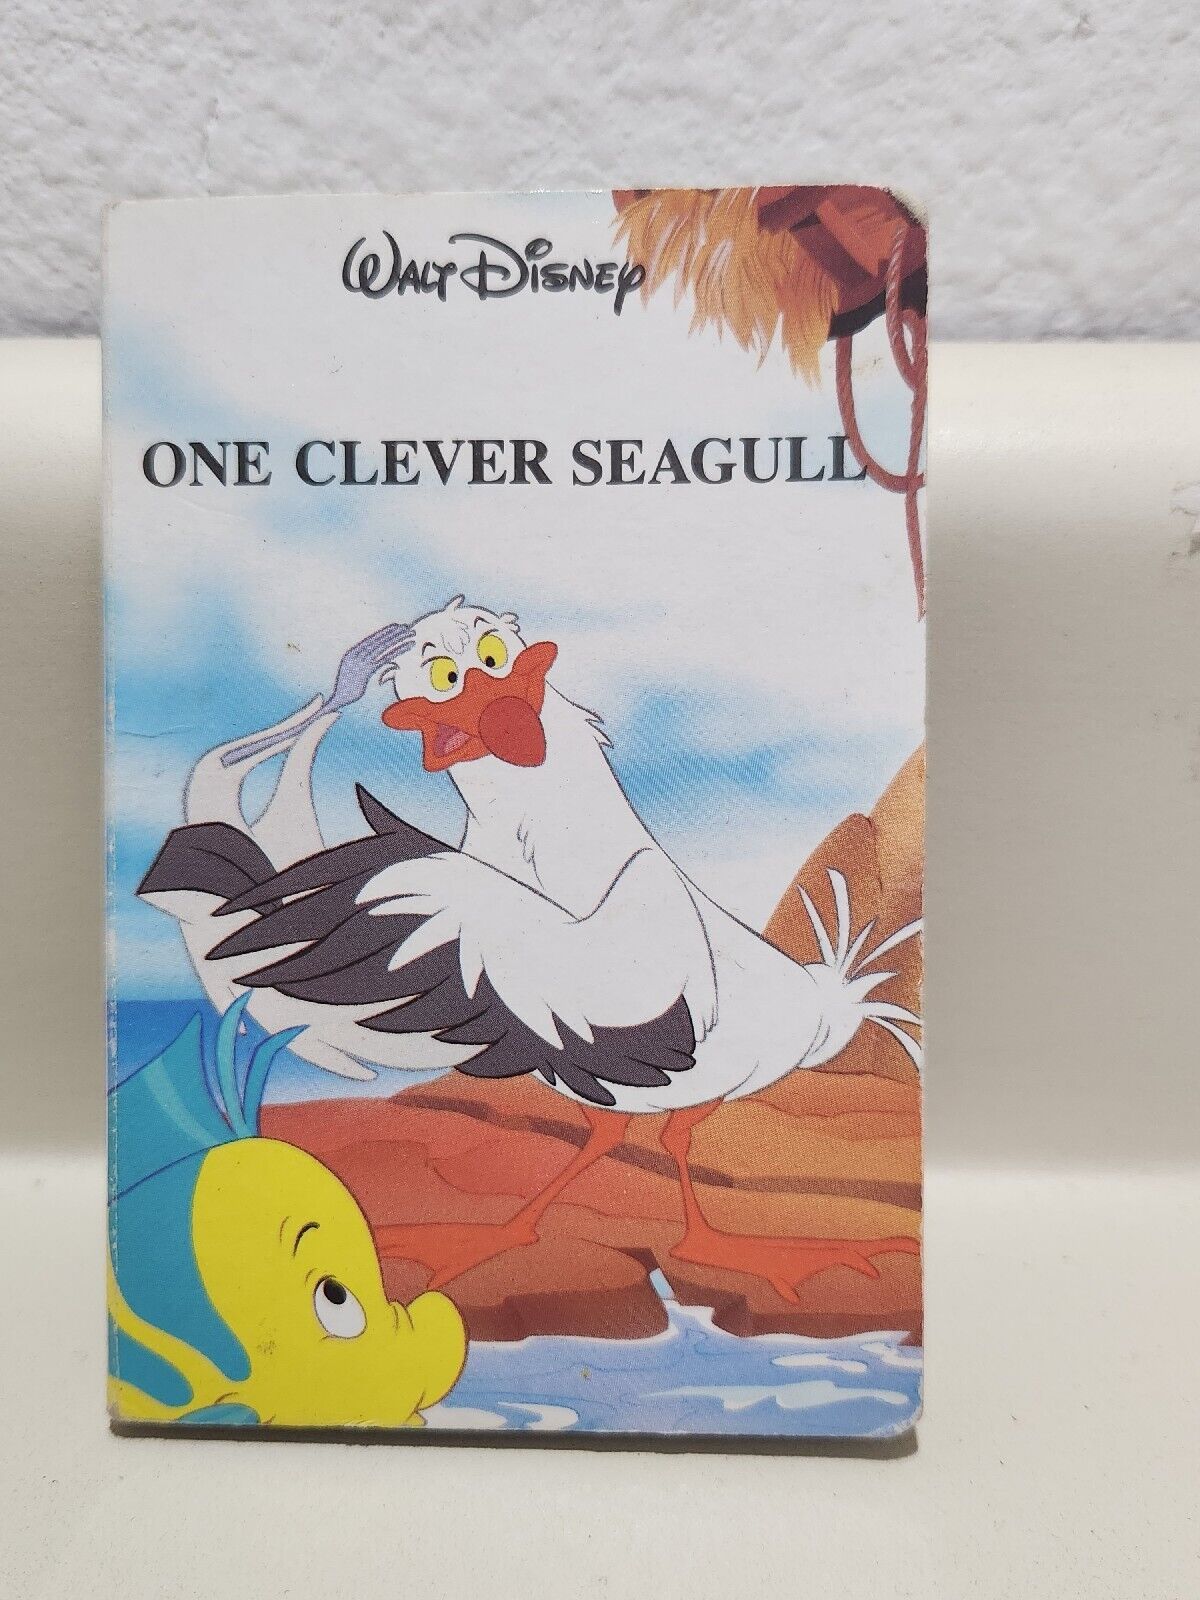 WALT DISNEY, ONE CLEVER SEAGULL BOOK BY TWIN BOOKS - LITTLE MERMAID 1990 5\